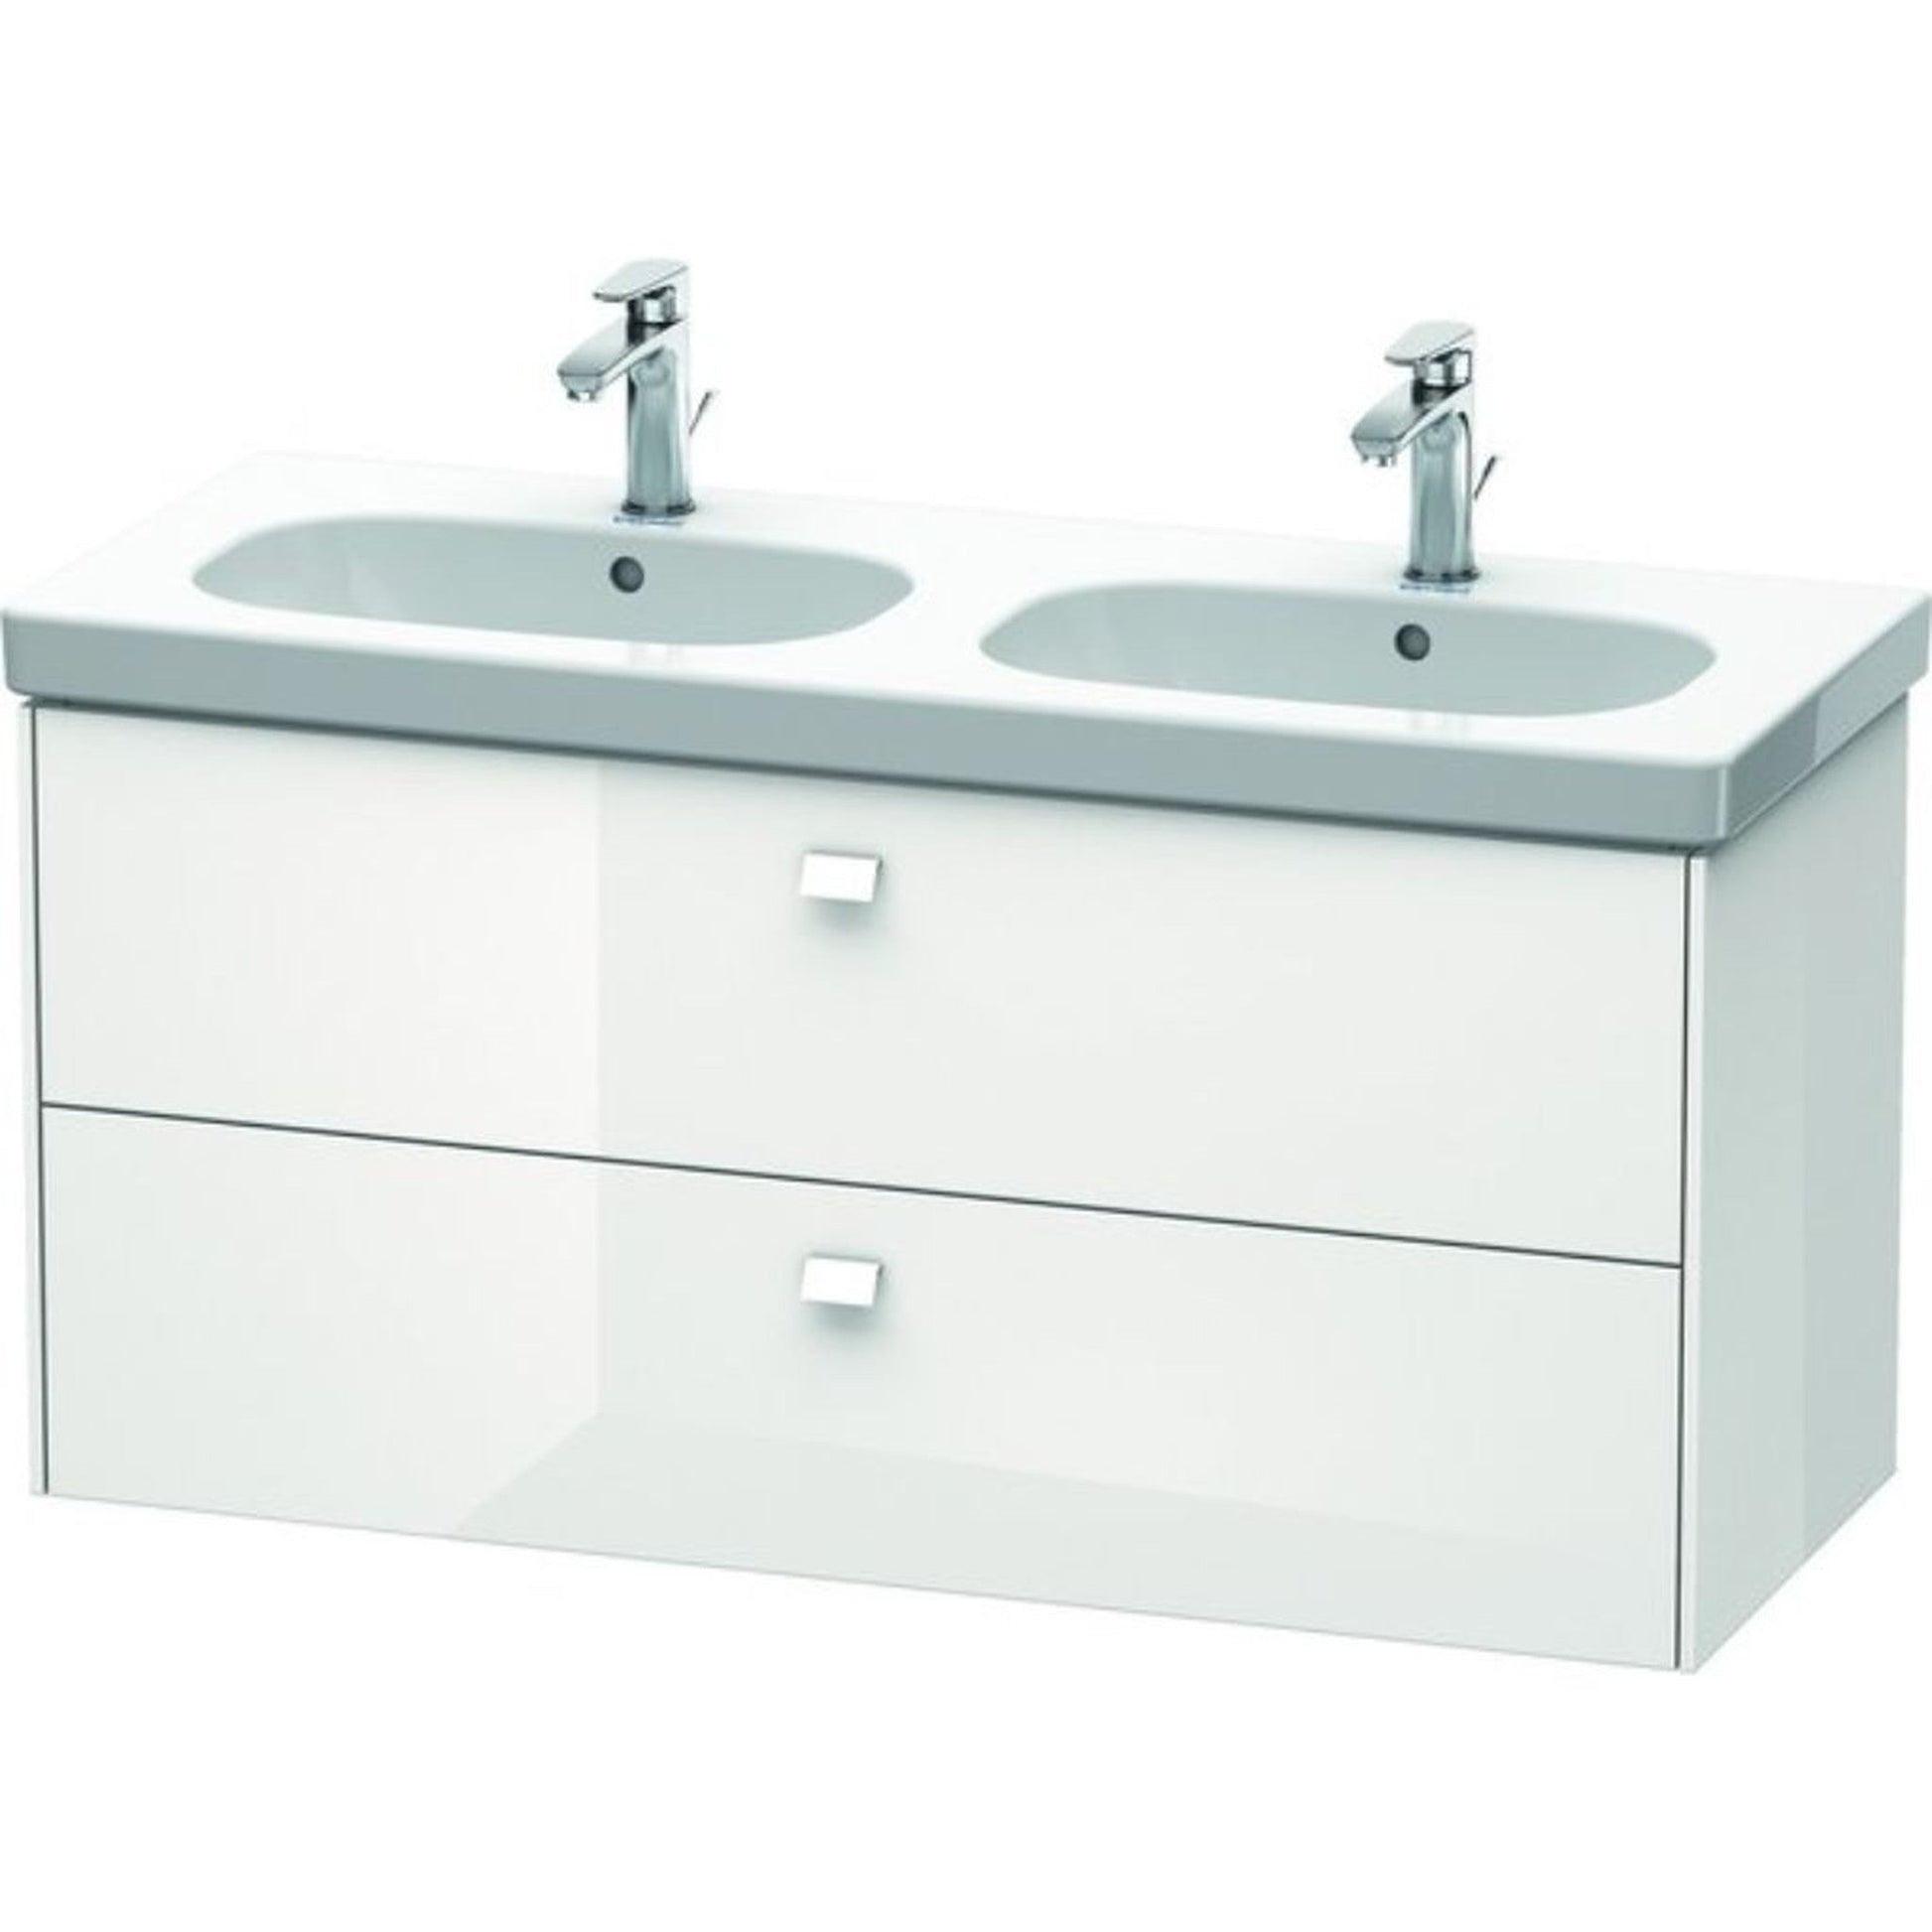 Duravit Brioso BR41480 46" x 22" x 18" Two Drawer Wall-Mount Vanity Unit in White High Gloss